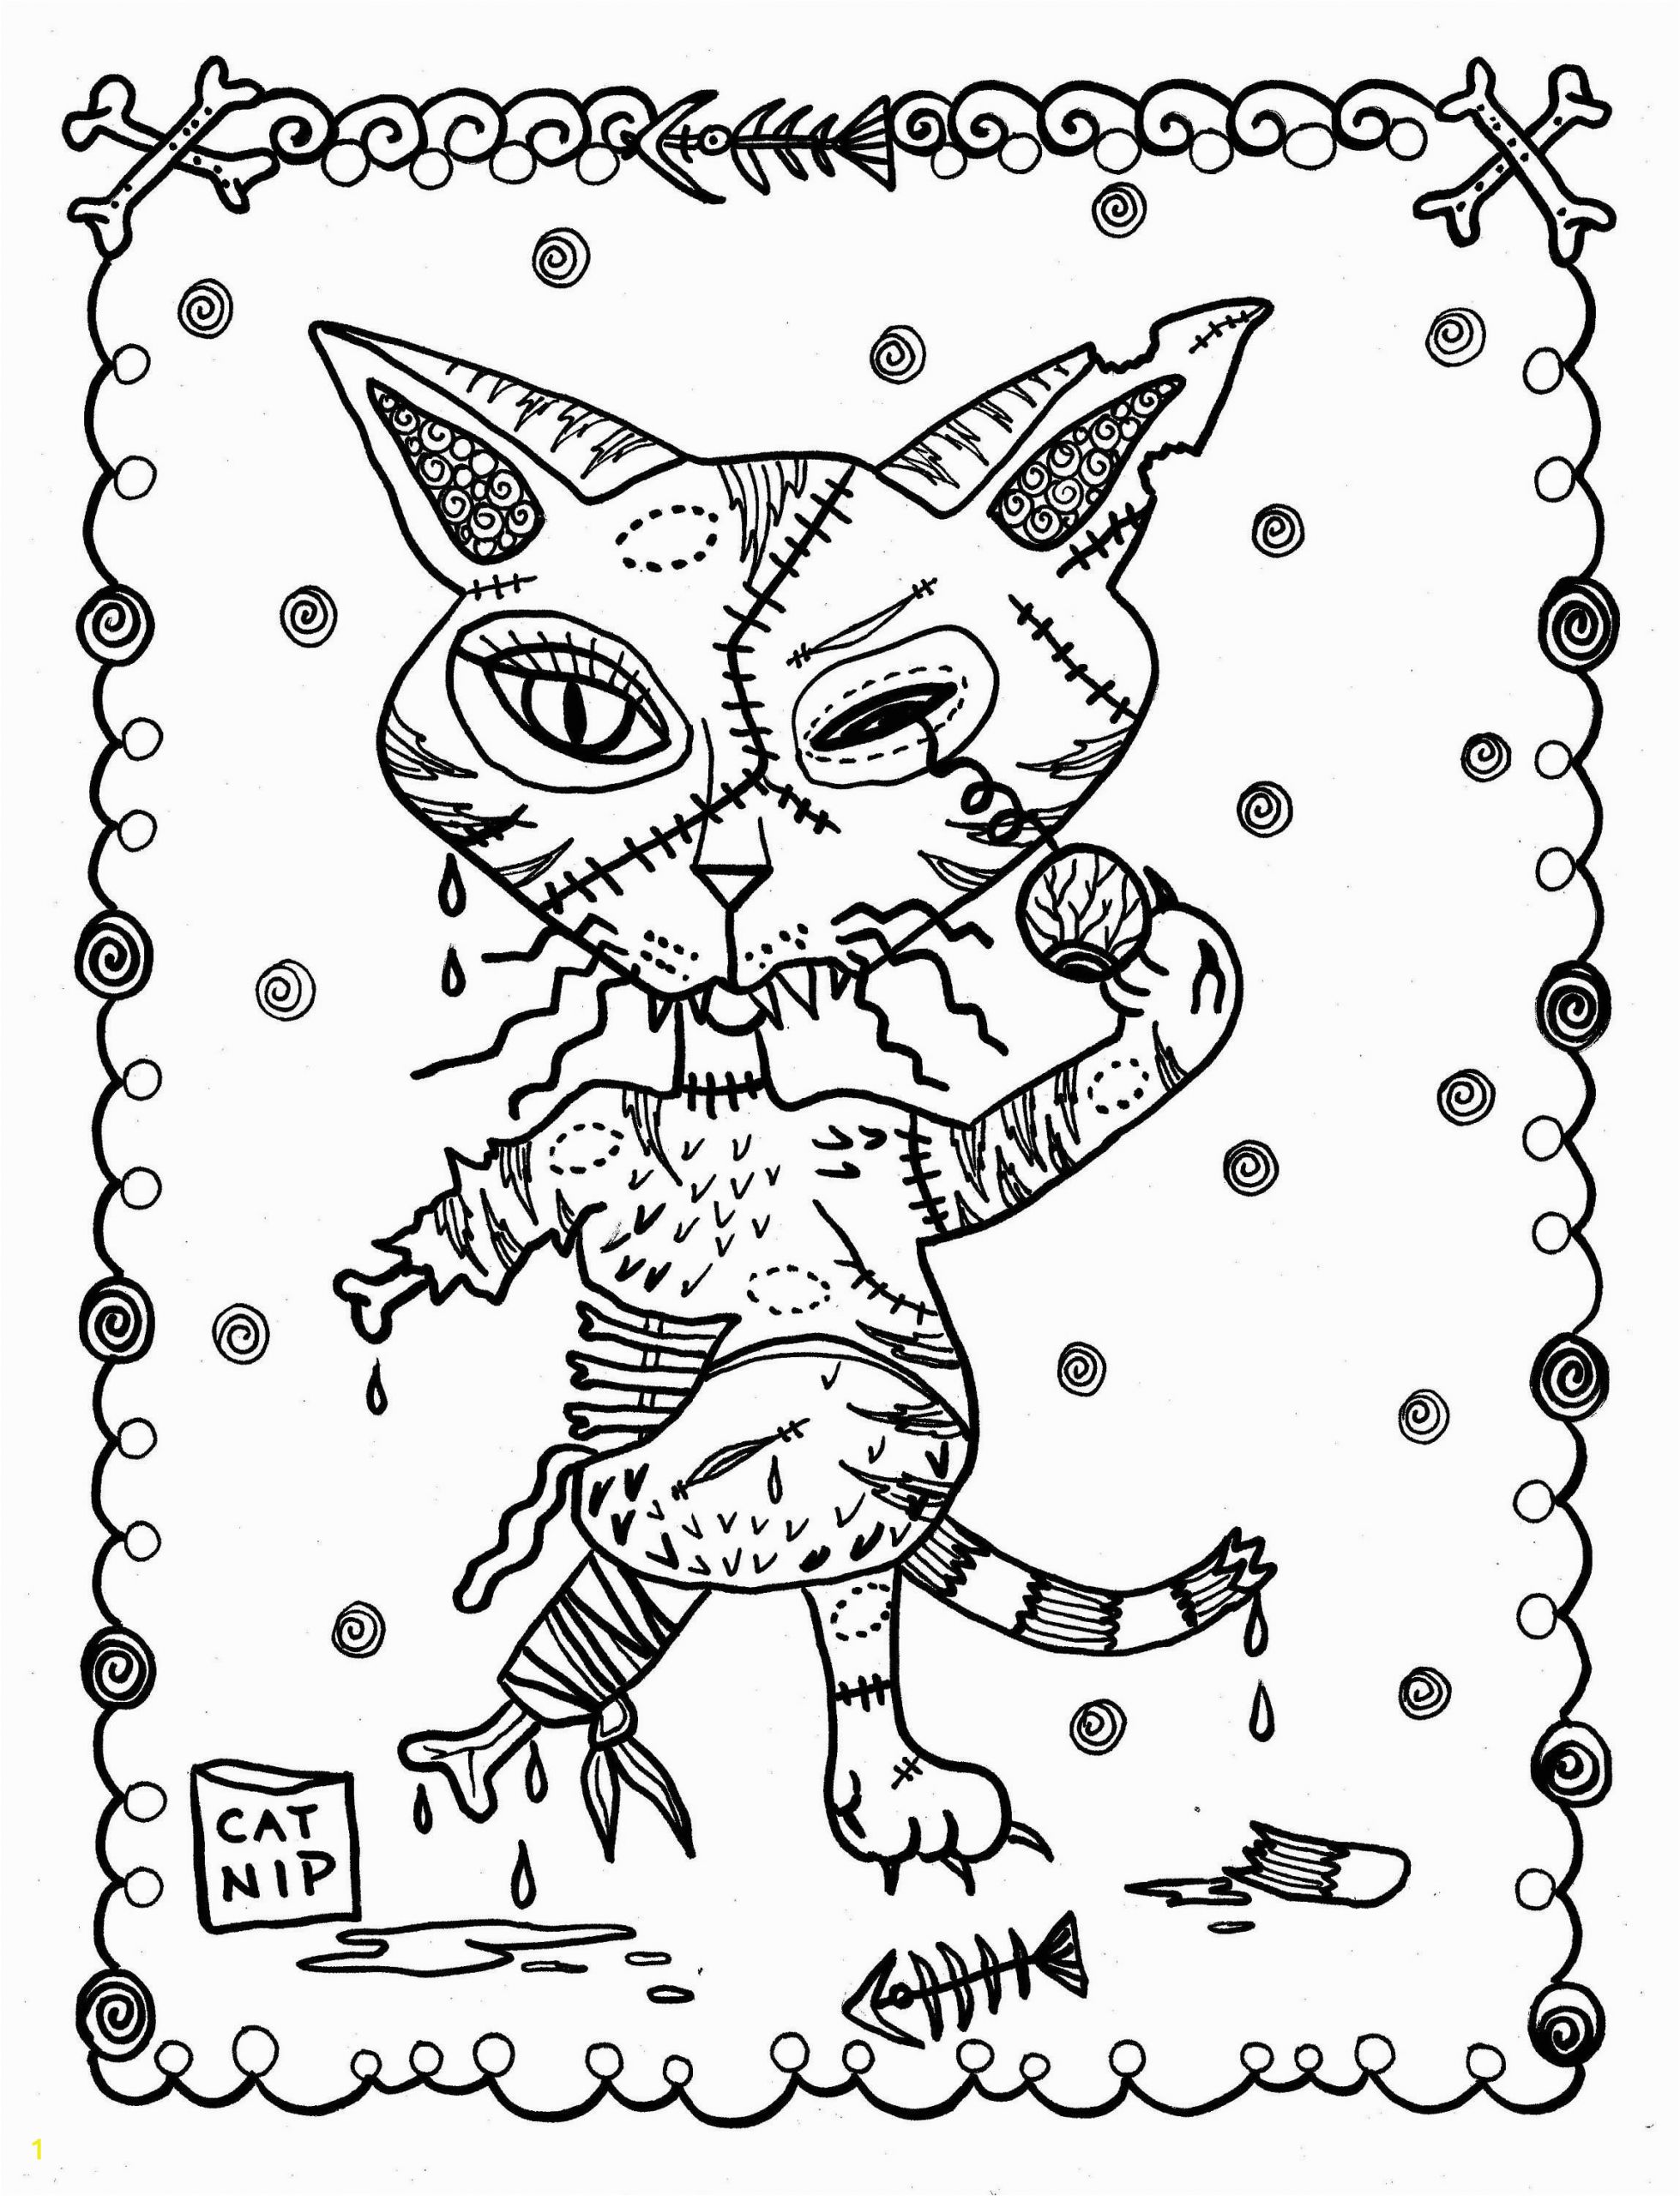 Siamese Cat Coloring Pages 5 Pages Fantasy Cats Instant S Scarry Halloween